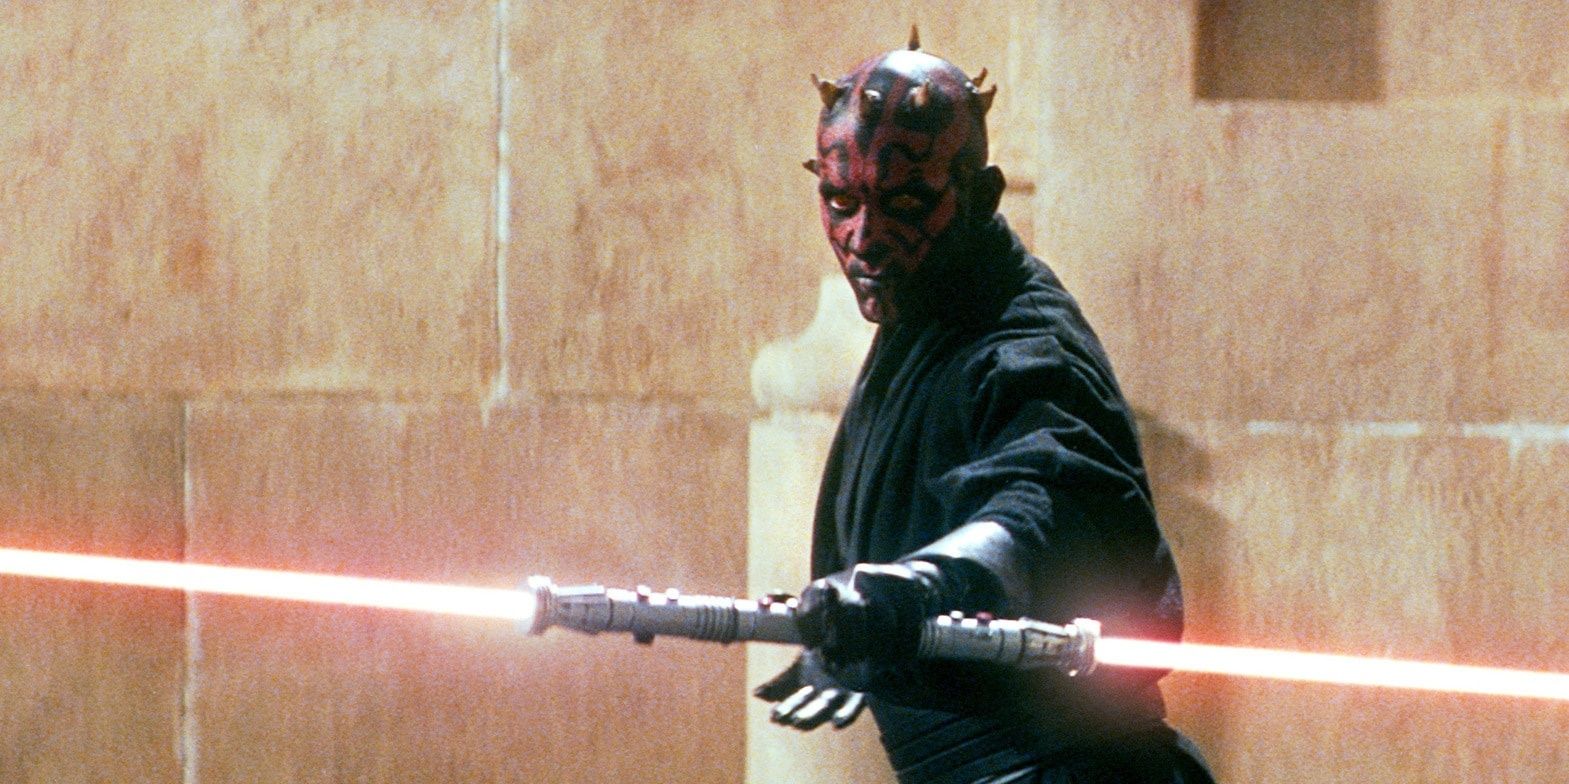 Darth Maul holding his double-bladed lightsaber in Star Wars